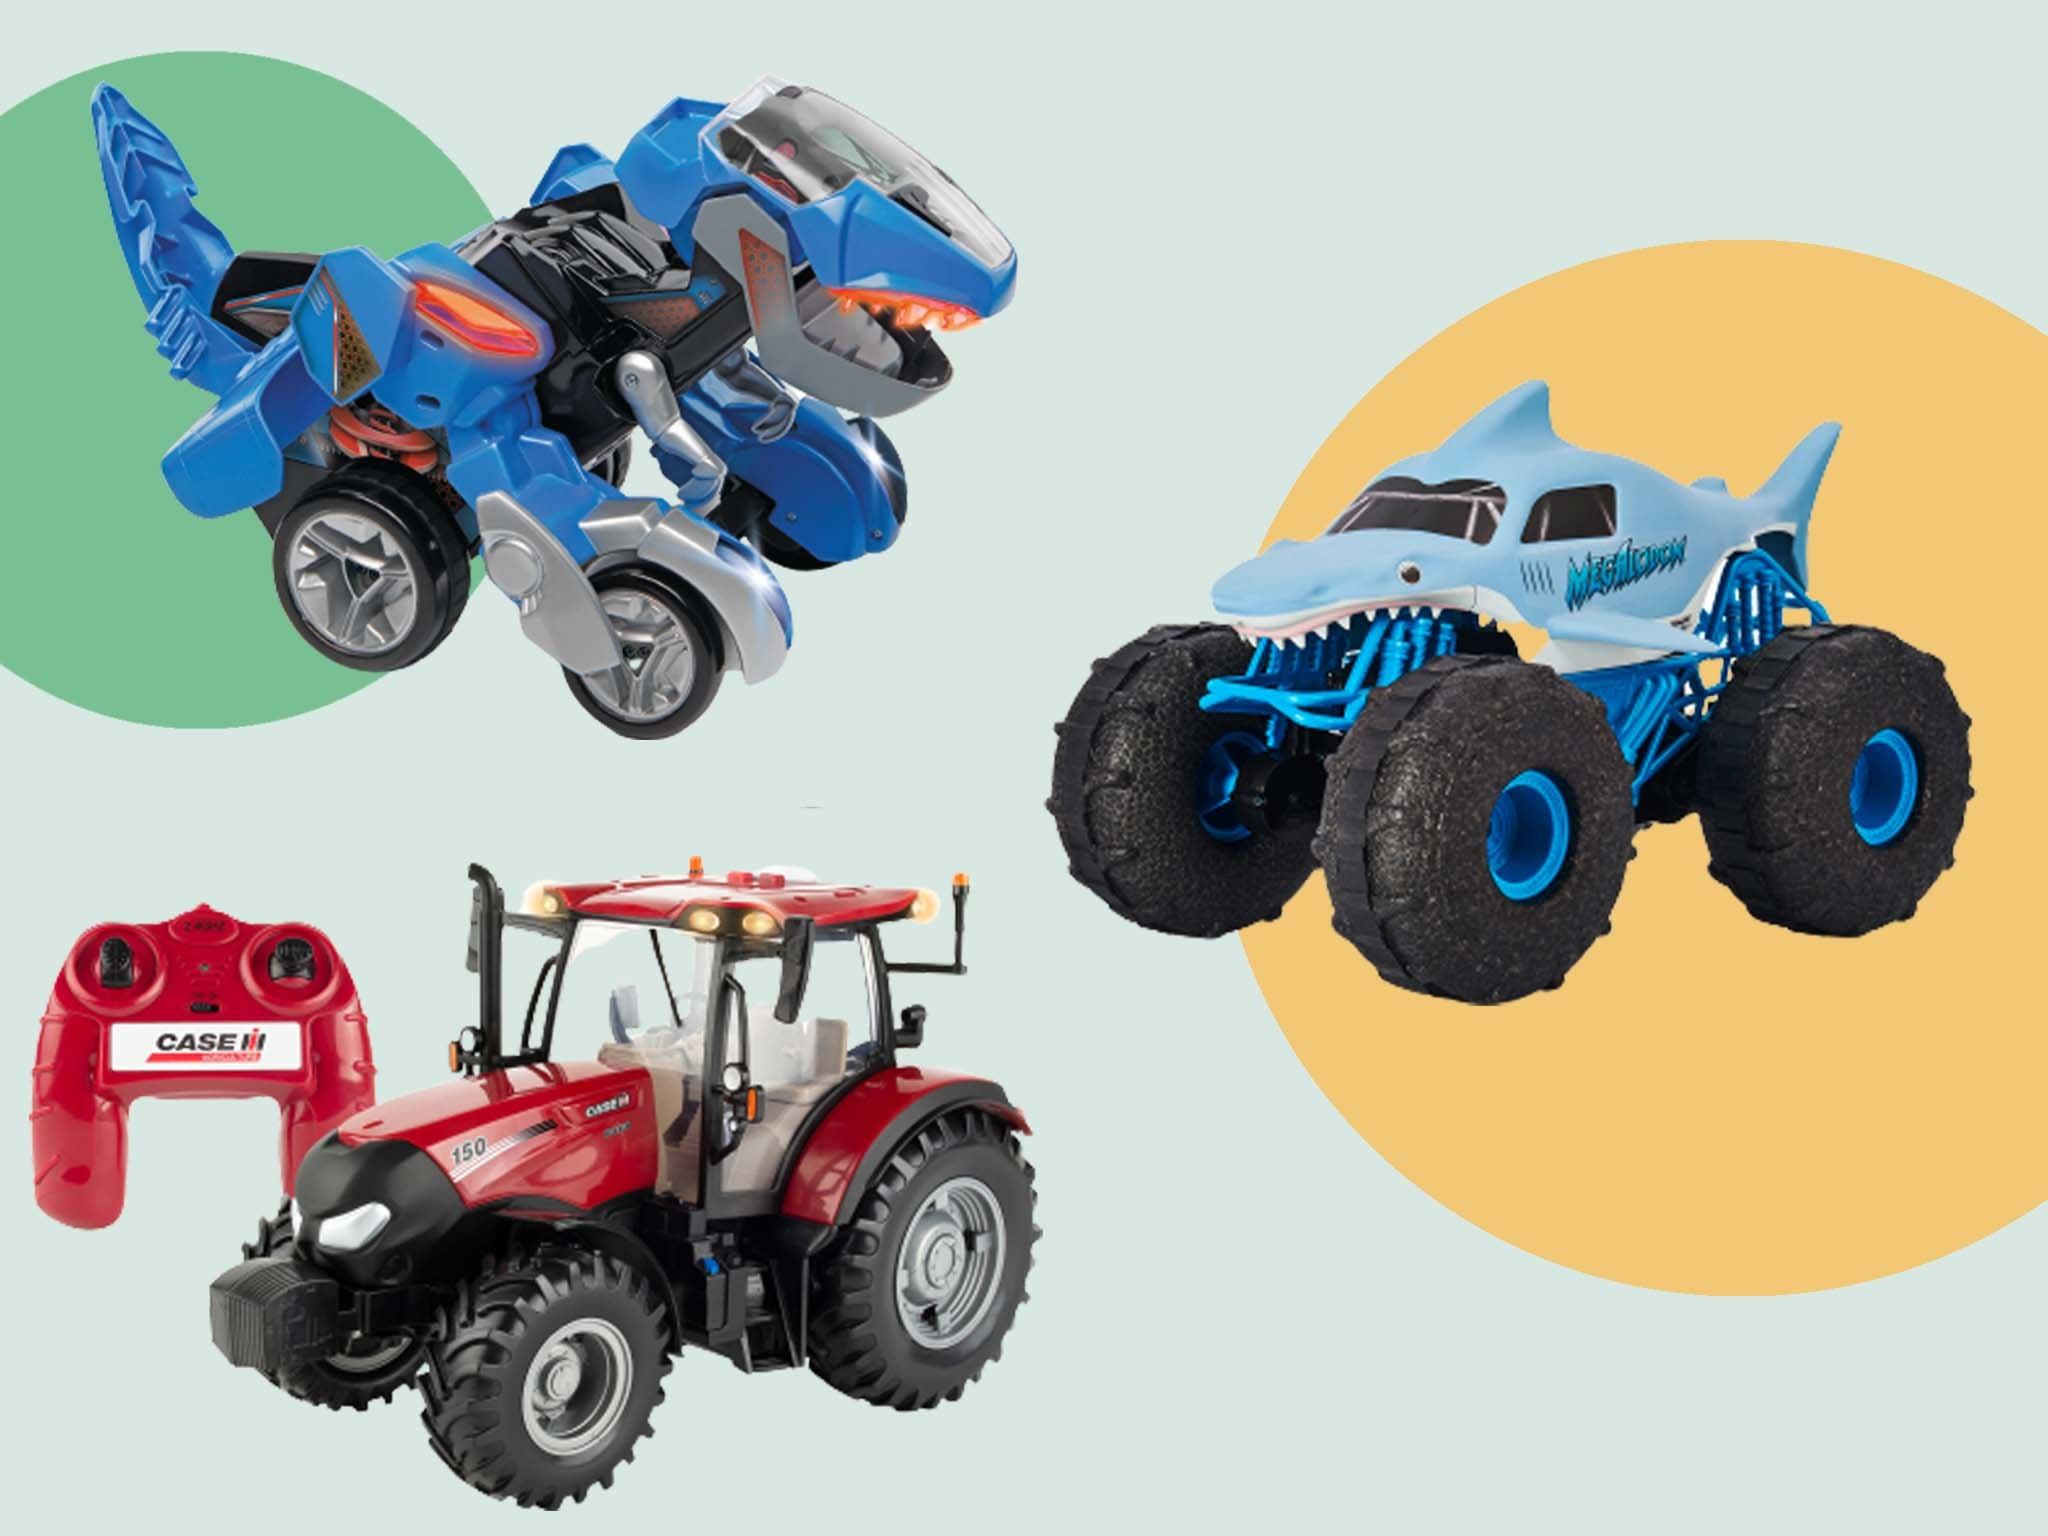 Remote Control Monster Trucks: Top Picks for Remote Control Monster Trucks